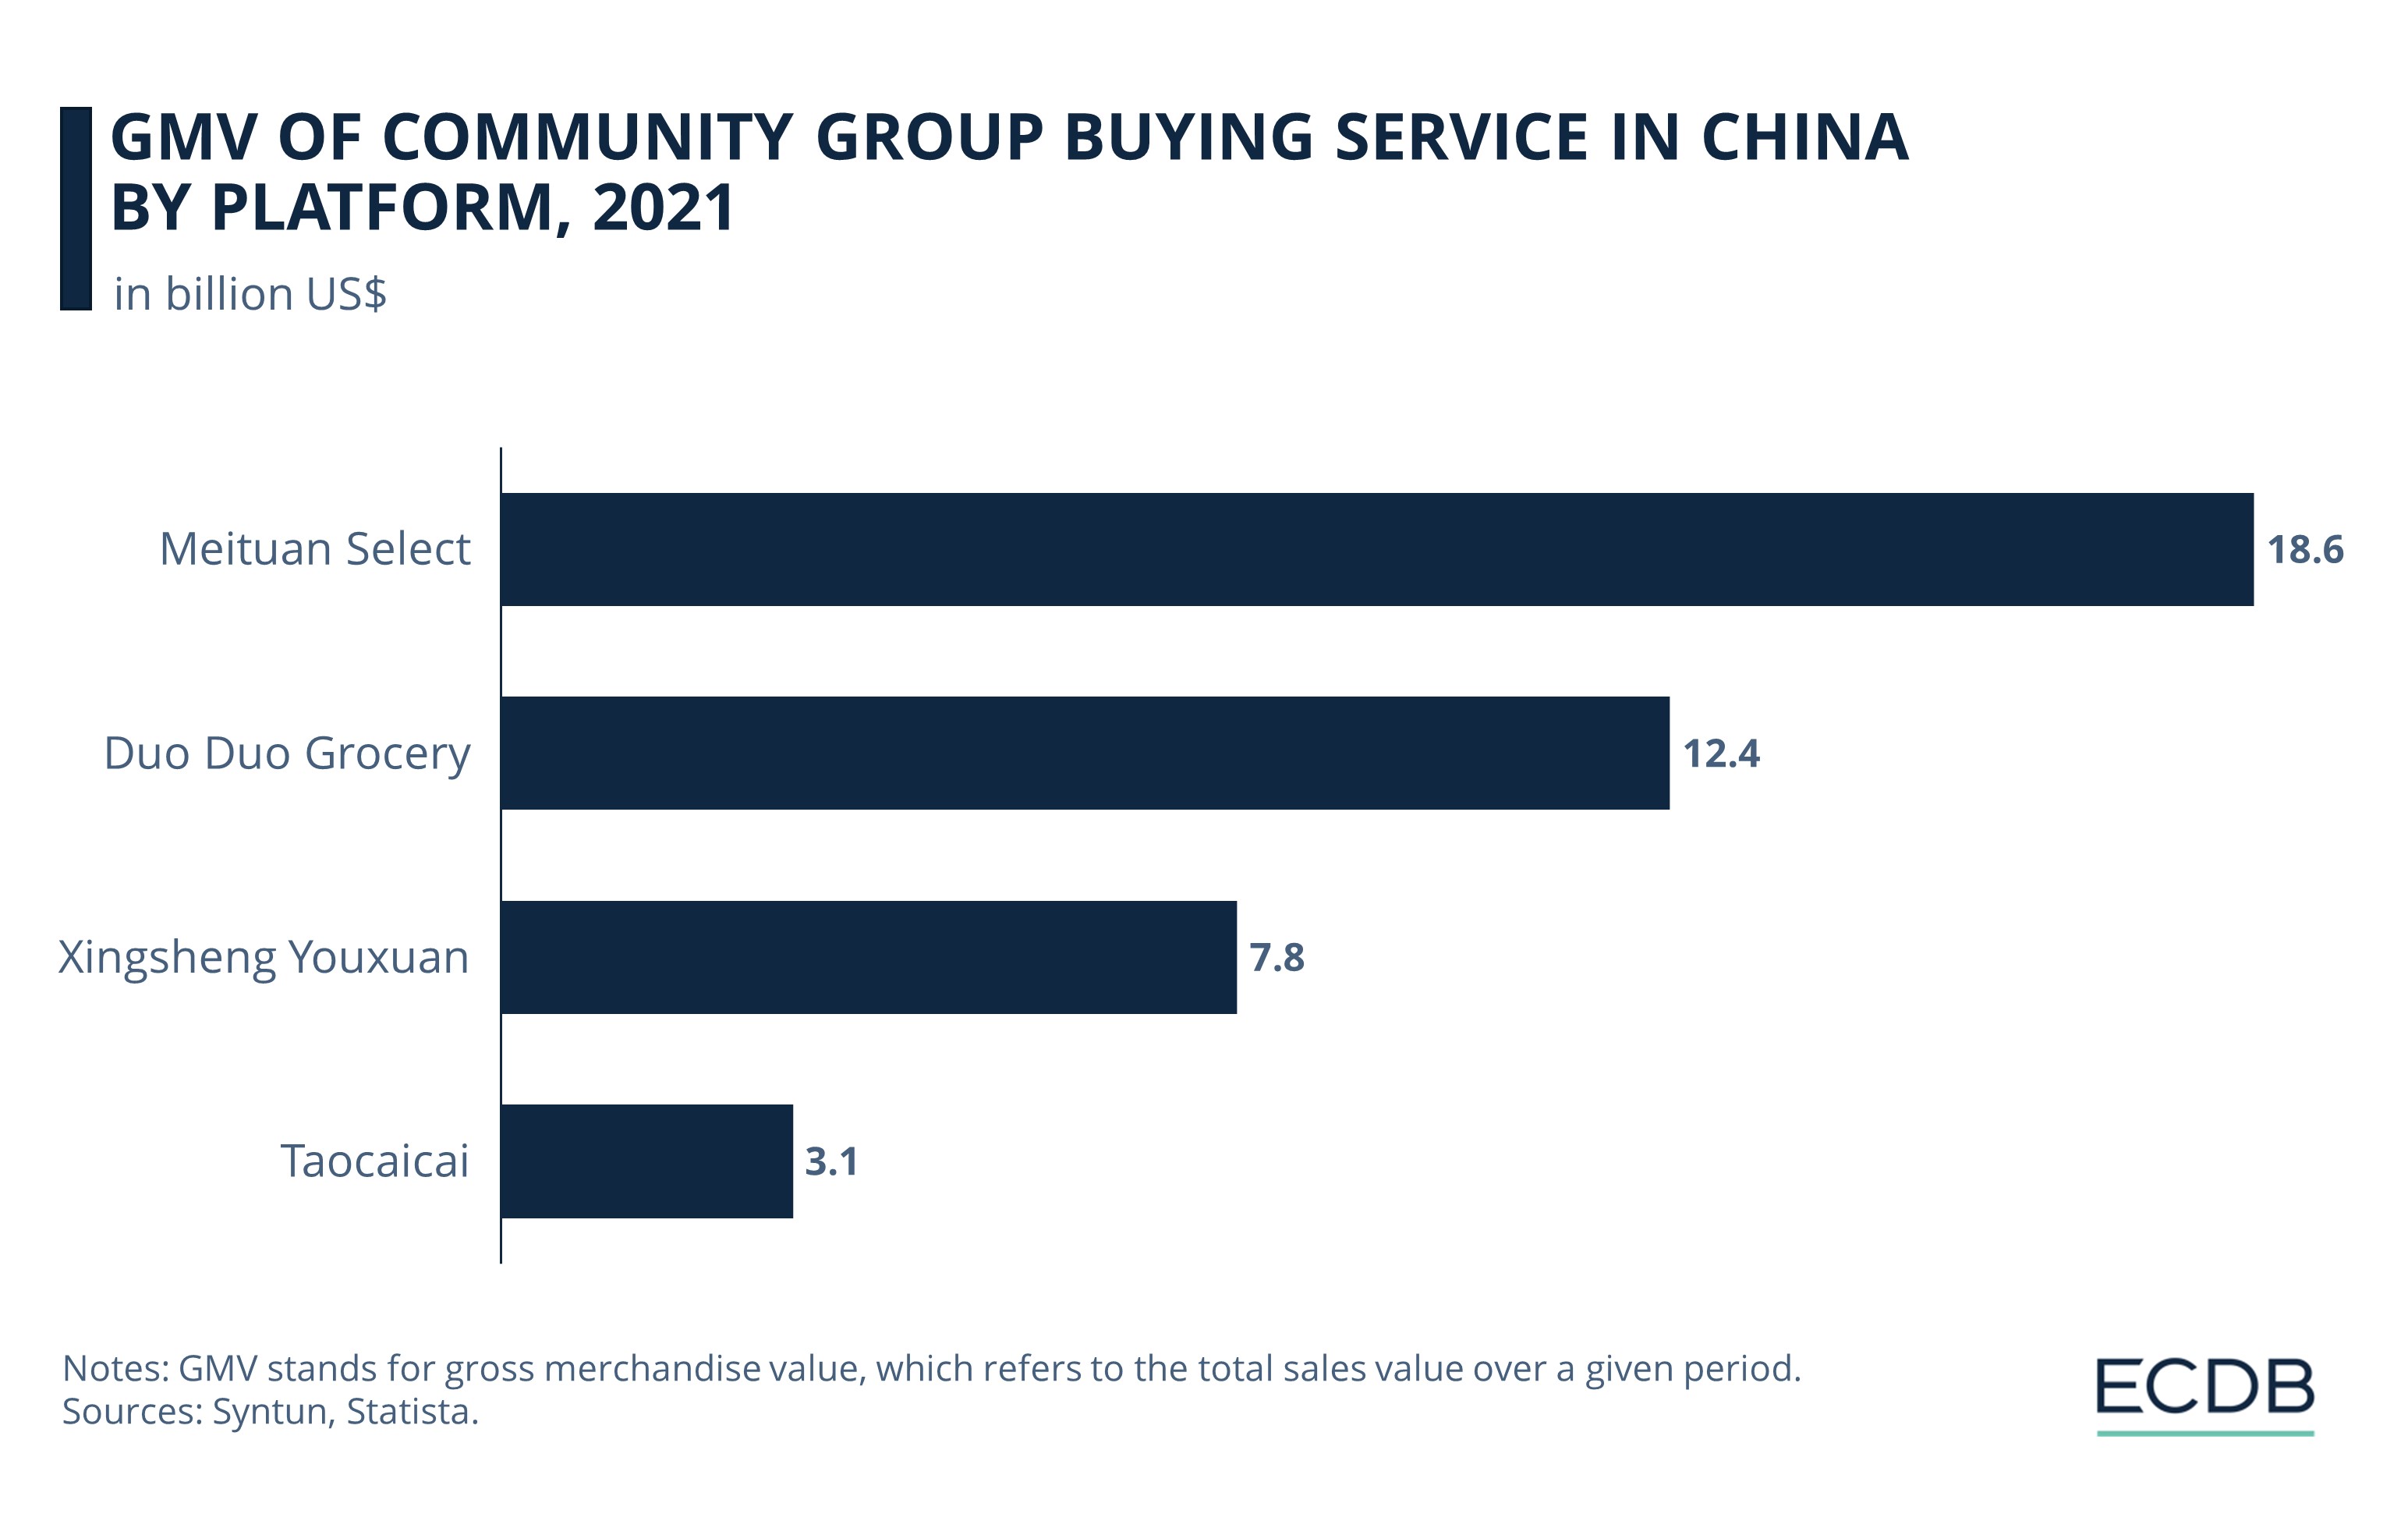 GMV of Community Group Buying Service in China by Platform, 2021